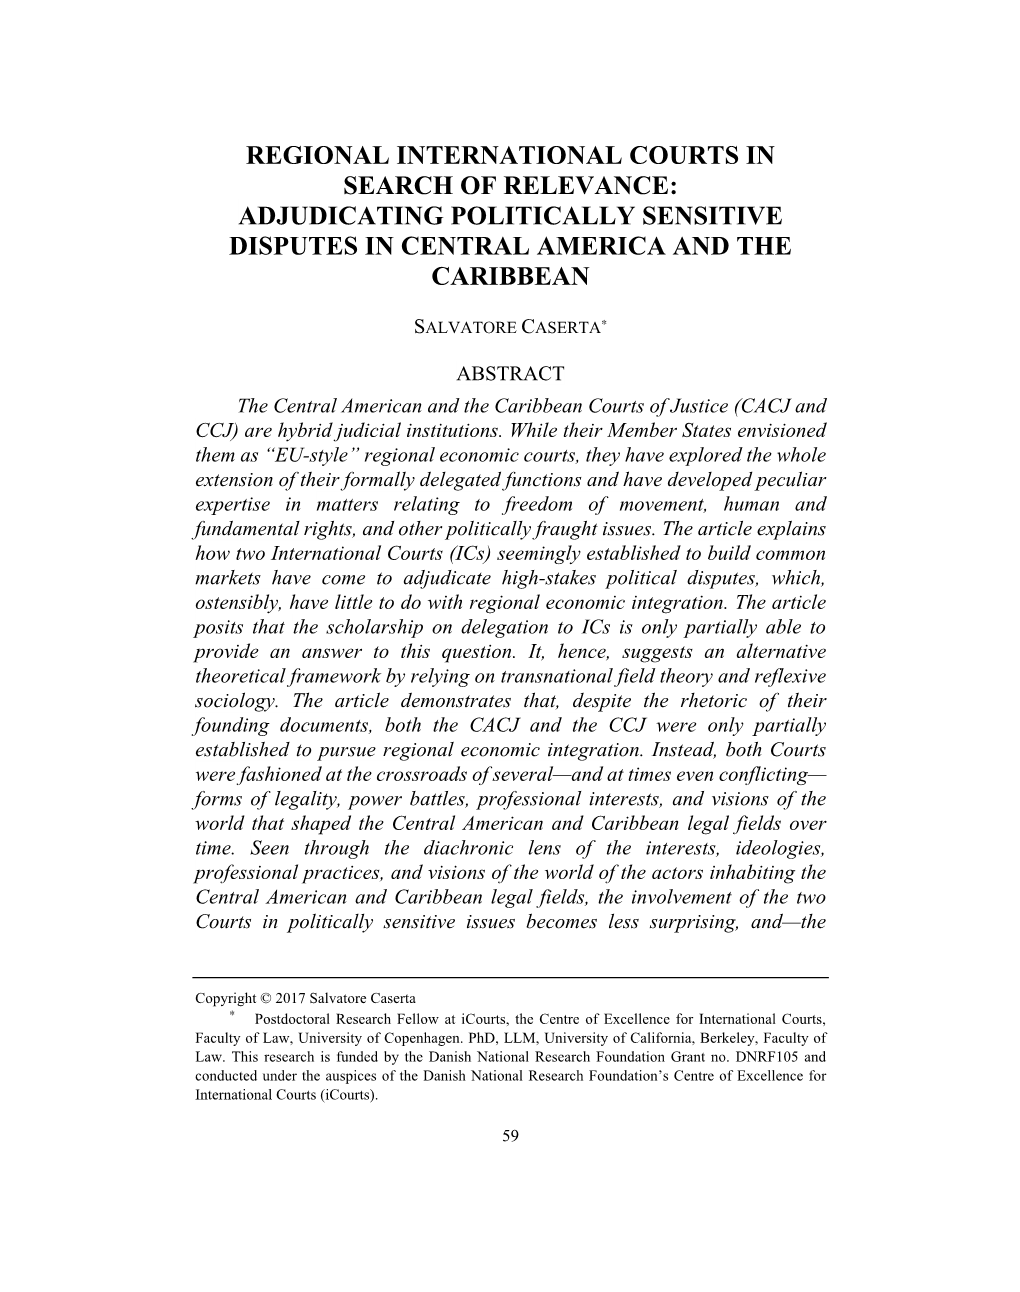 Adjudicating Politically Sensitive Disputes in Central America and the Caribbean